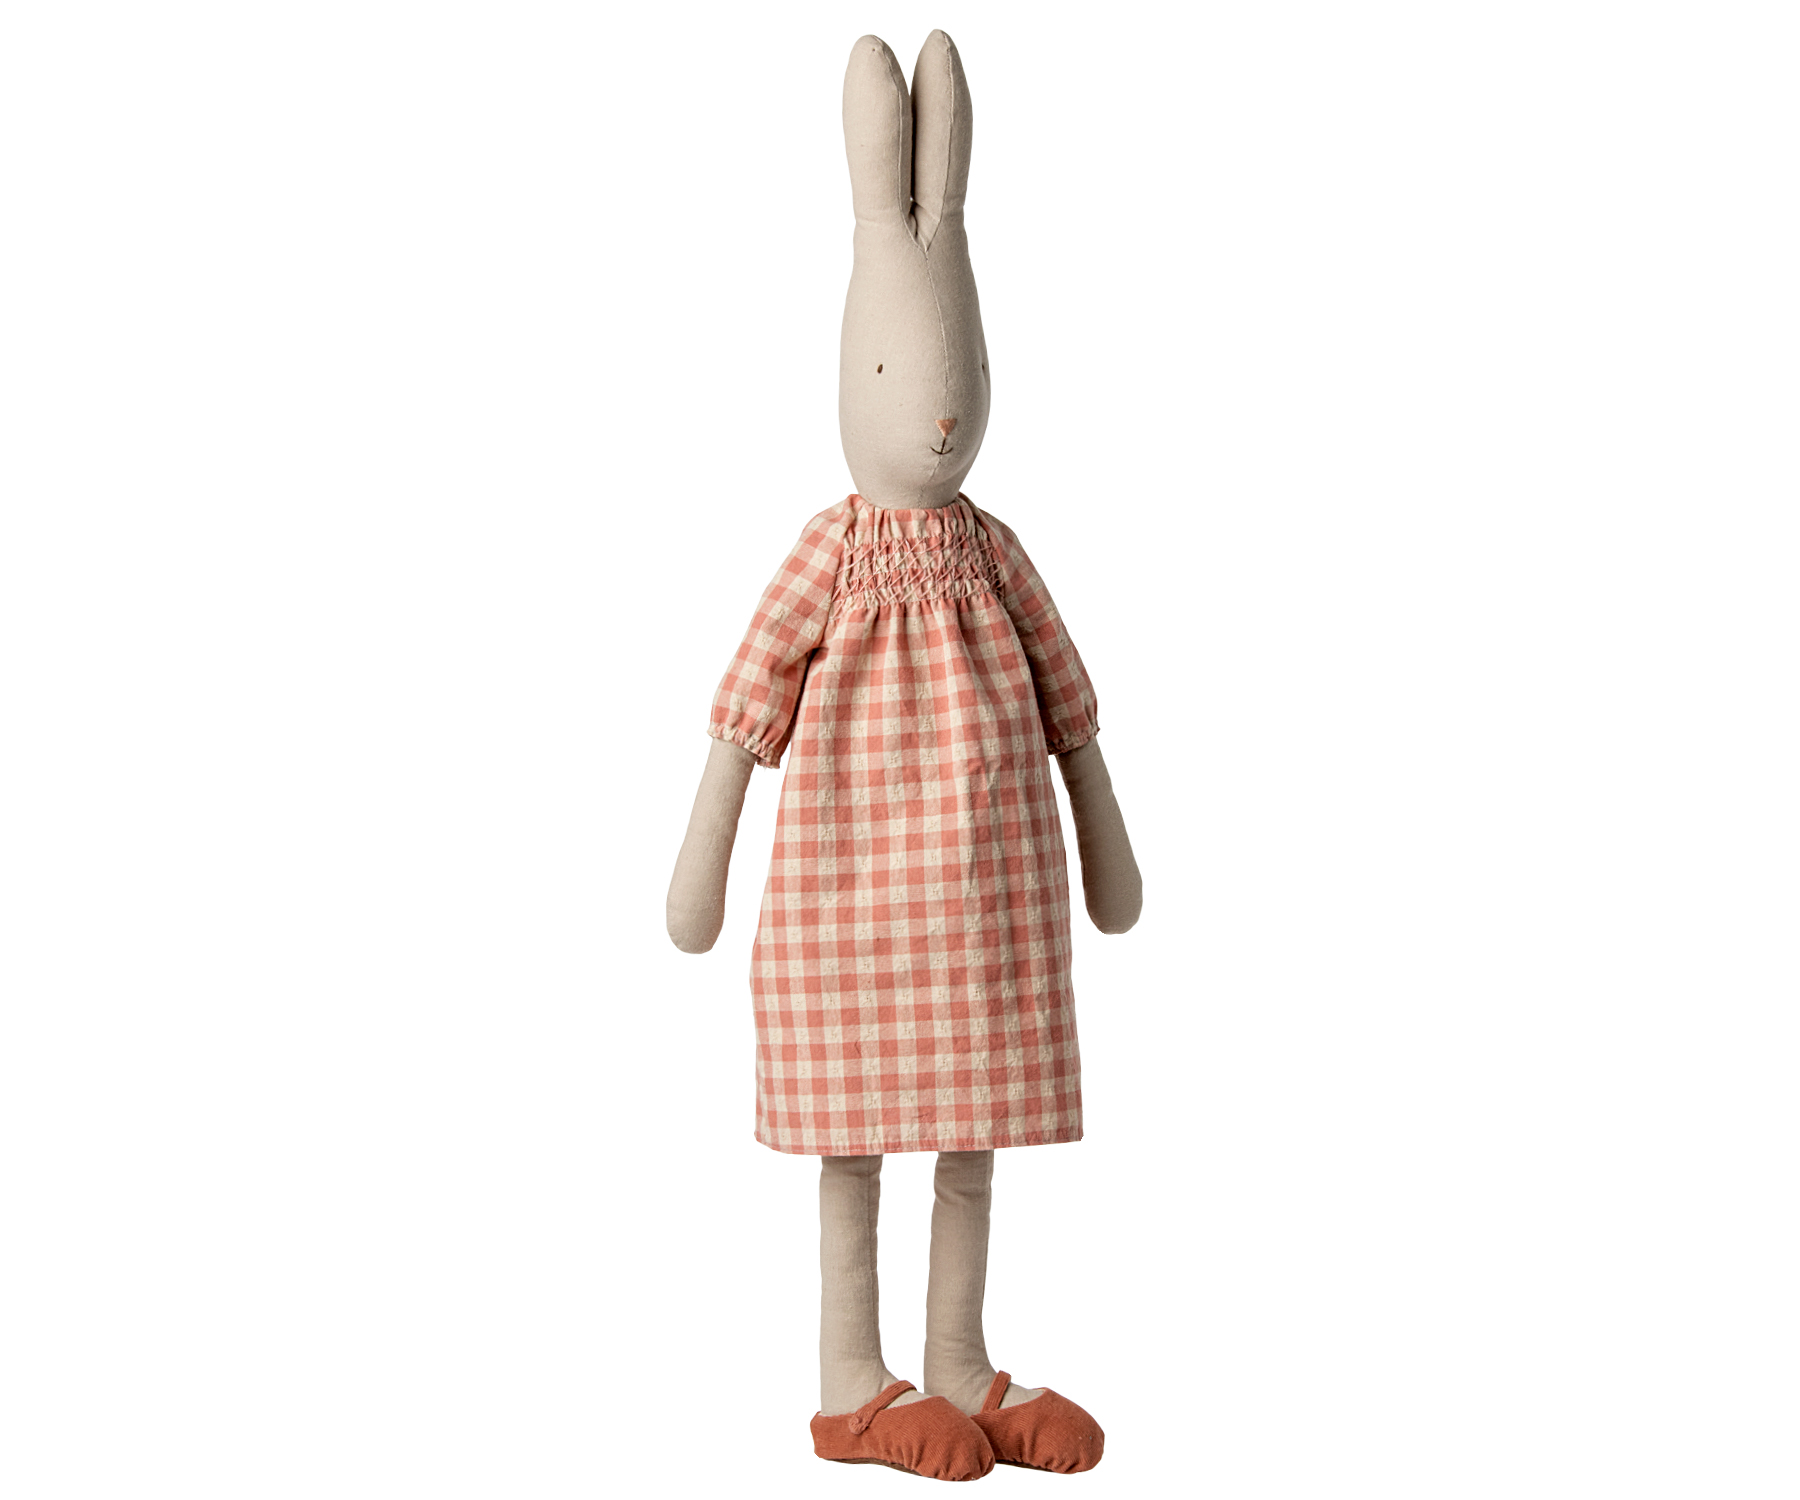 Bunny size 4, Knitted dress